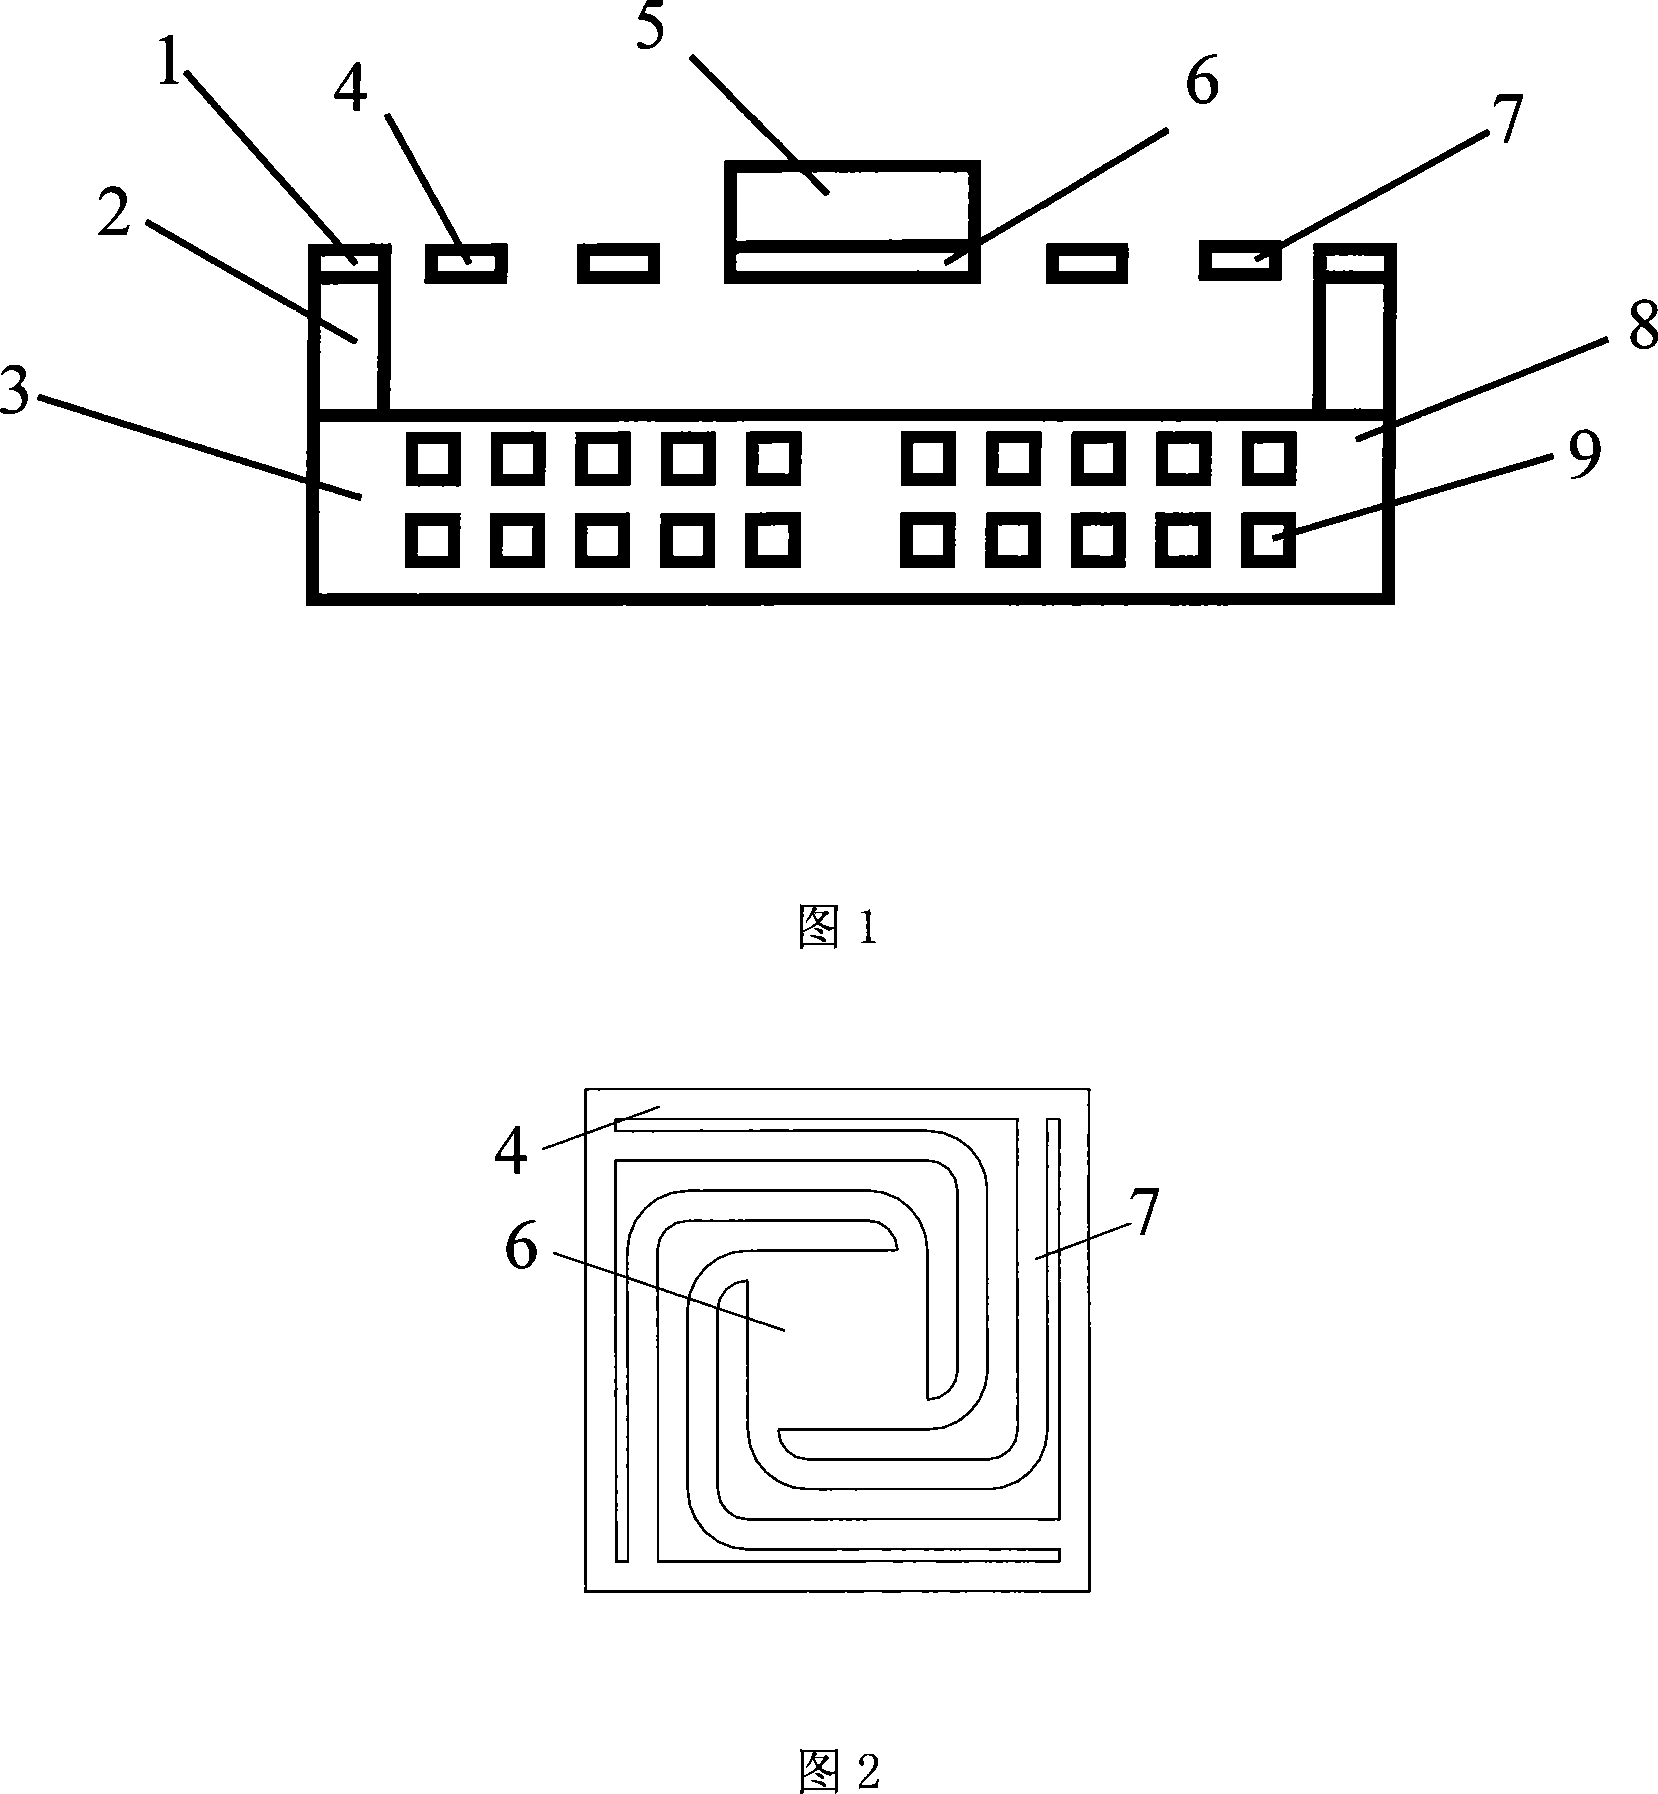 Minisize electromagnetic low-frequency vibration energy collecting device